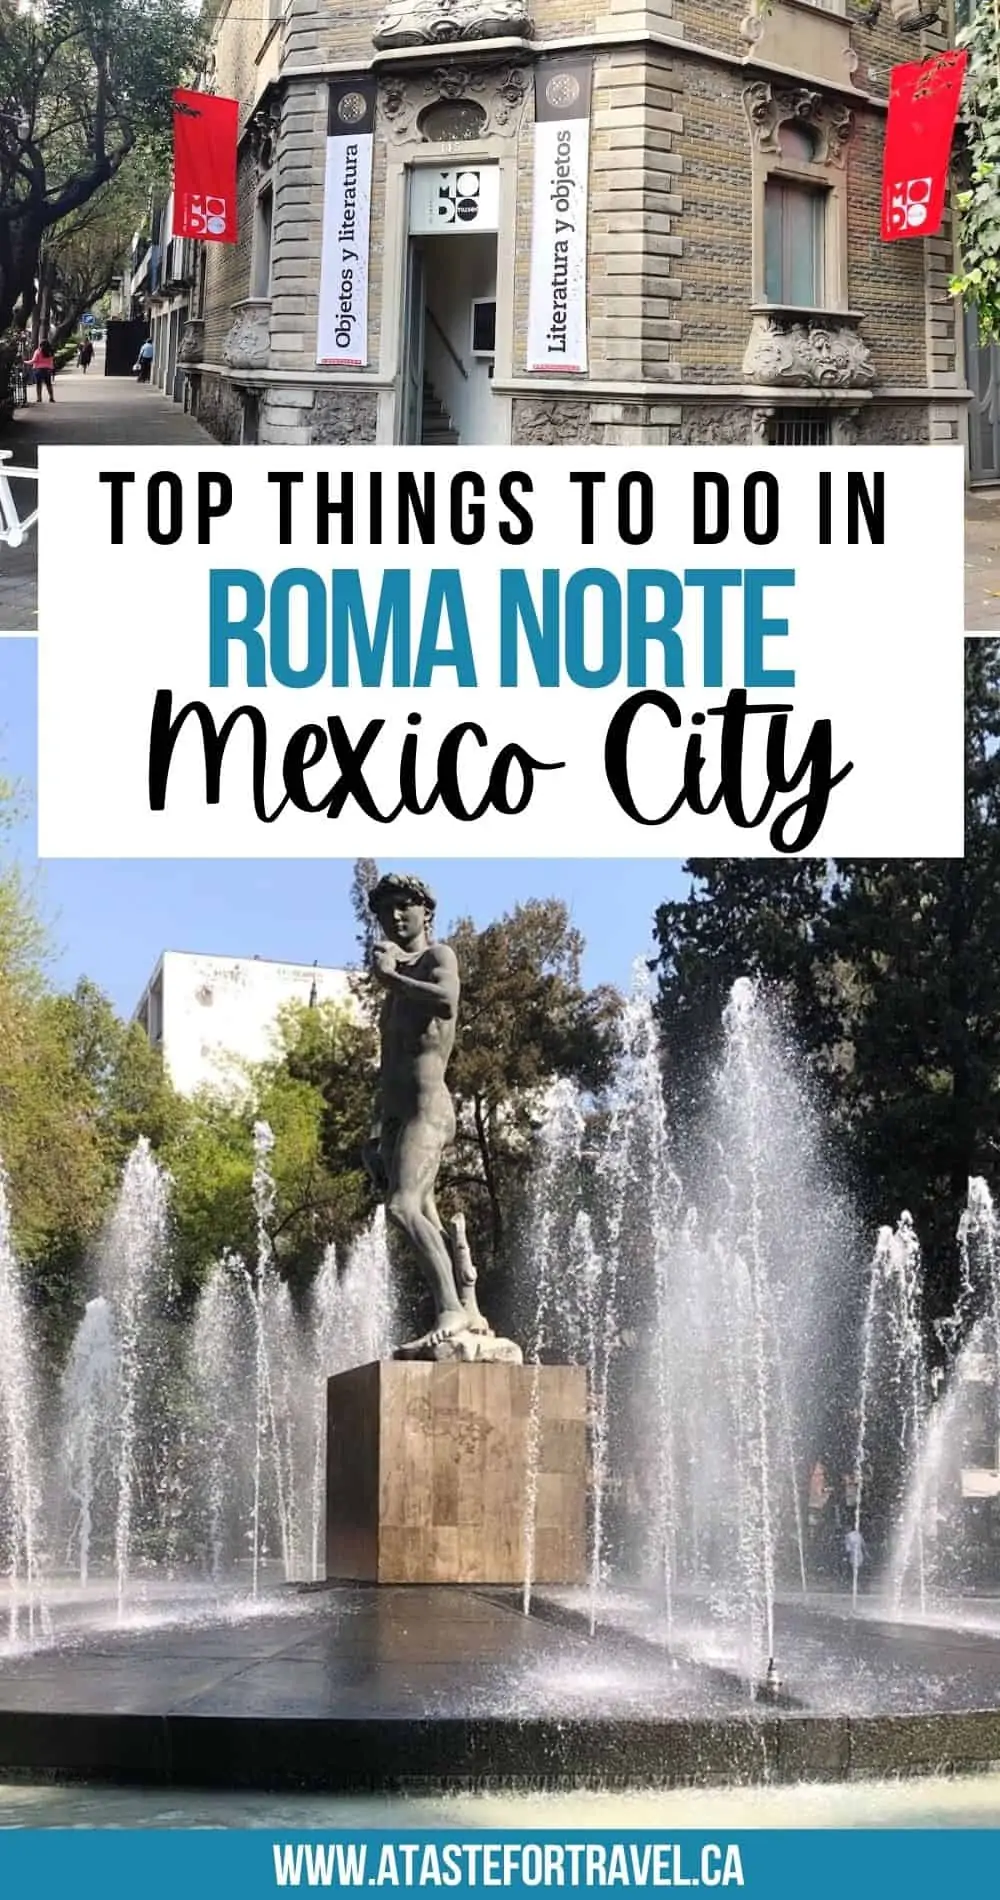 Pinterst text overlay of top things to do in Roma Norte on a collage of a fountain and museum.